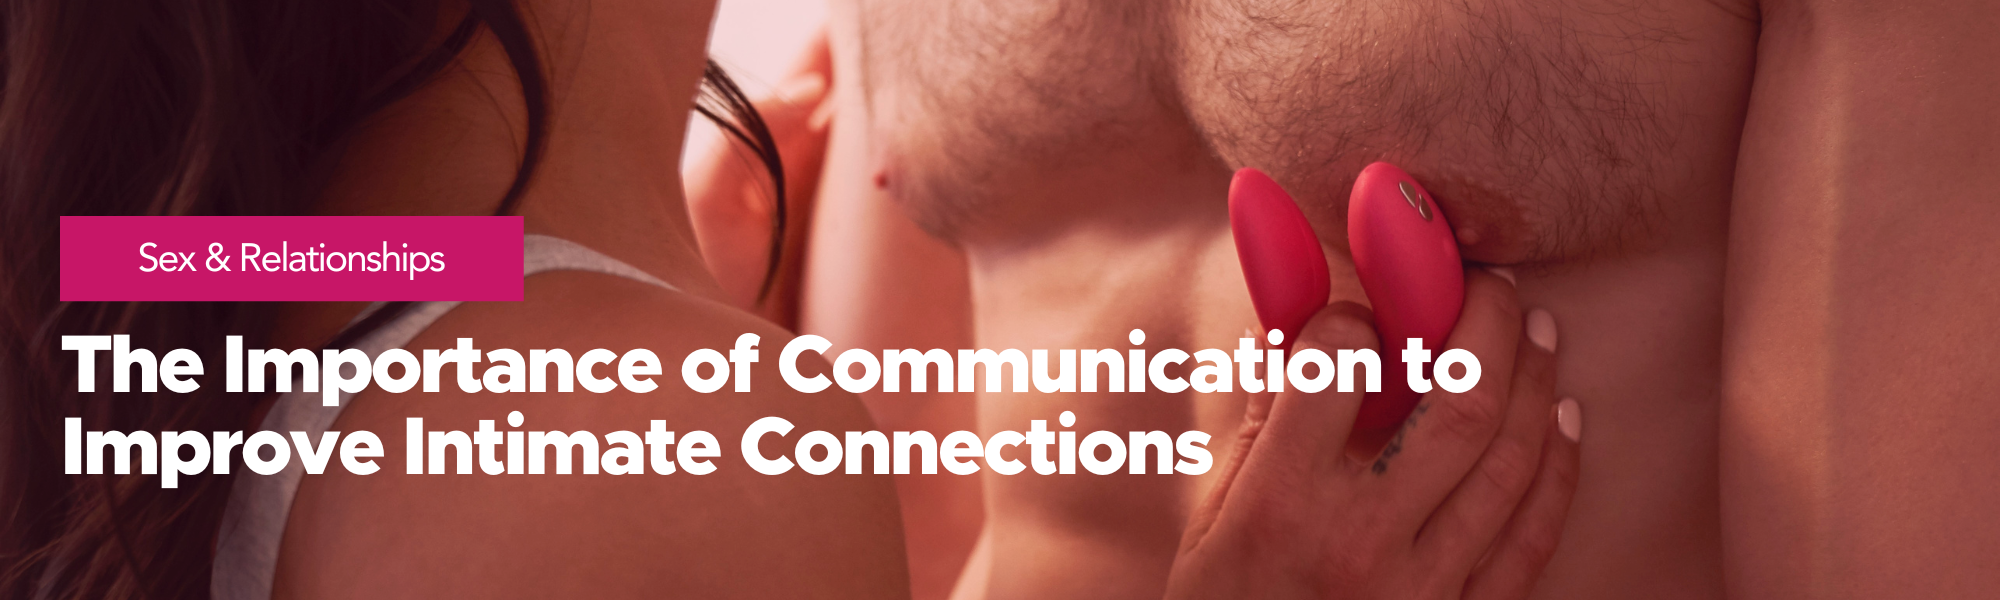 The importance of communication to improve intimate connections